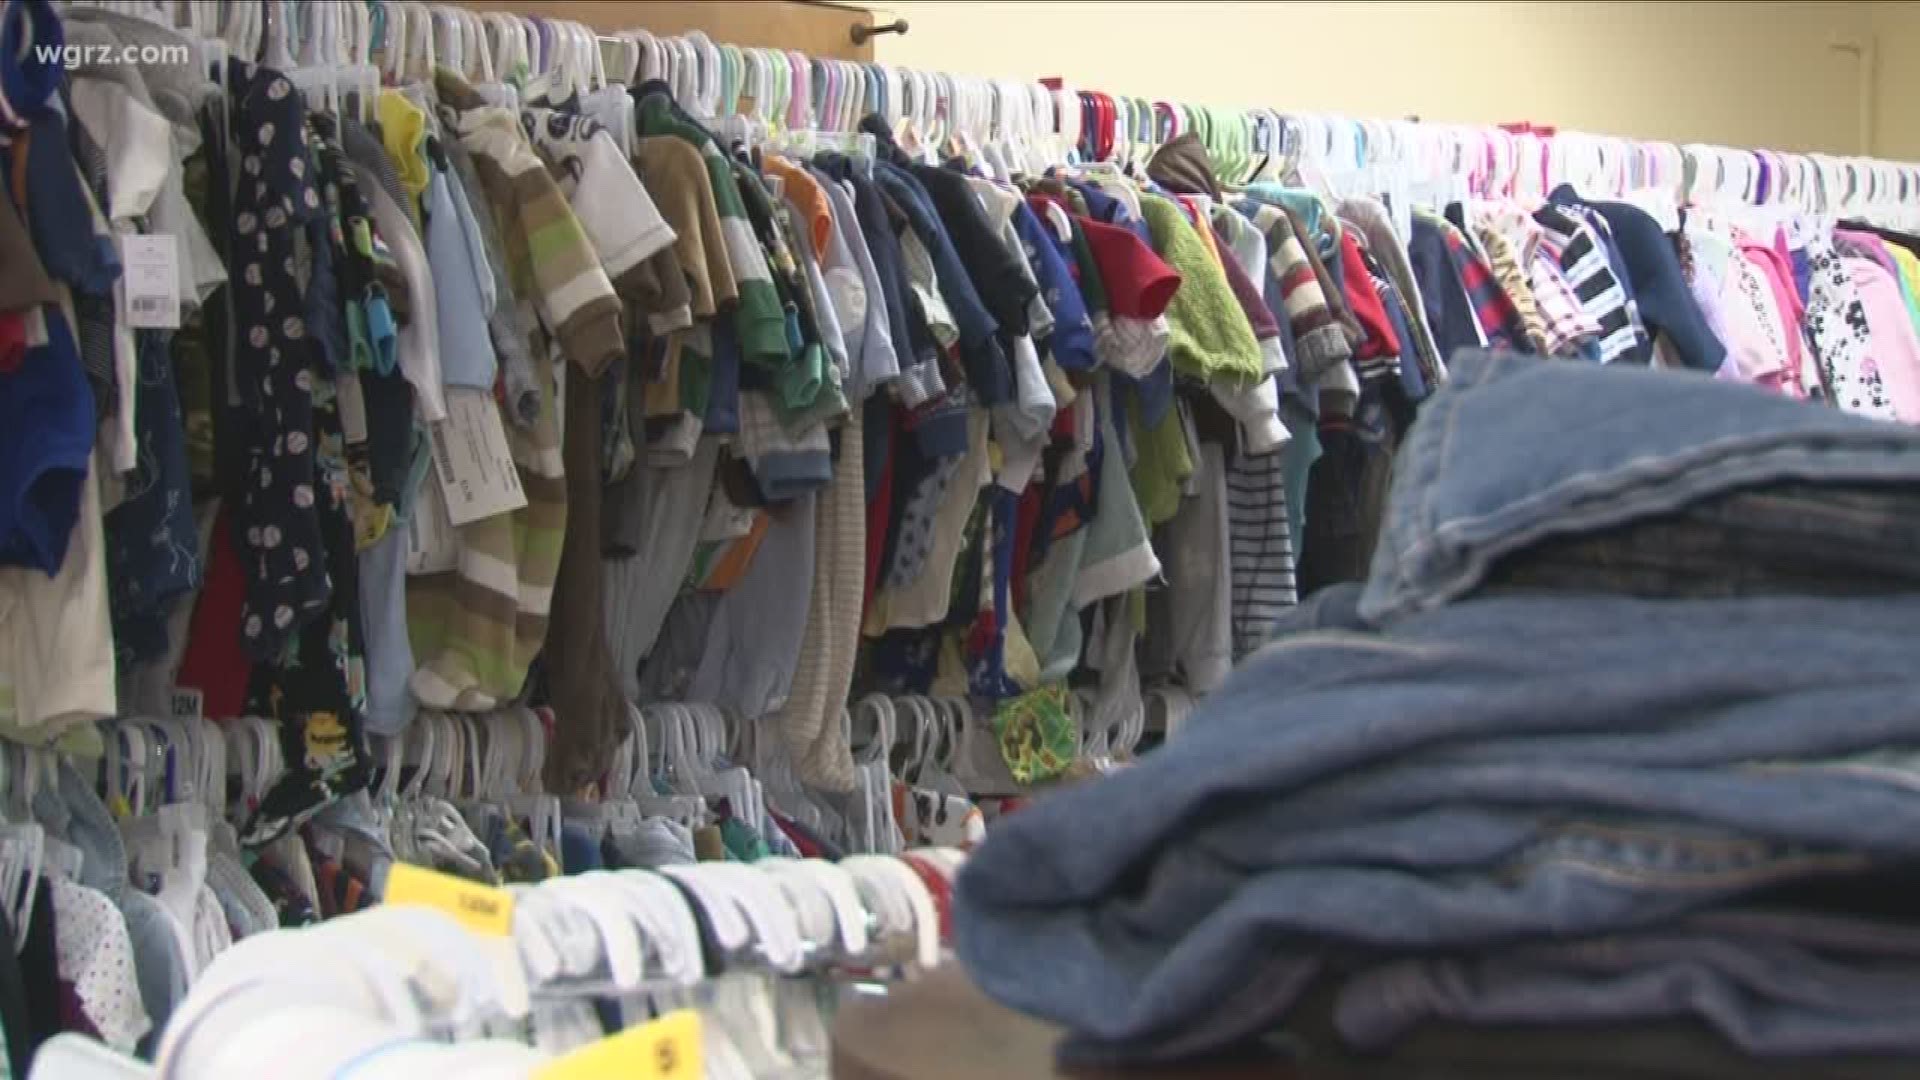 Three foster moms in Western New York wanted to do something to help other parents who care for foster children, so they decided to open a community closet where kids could get clothes for free.